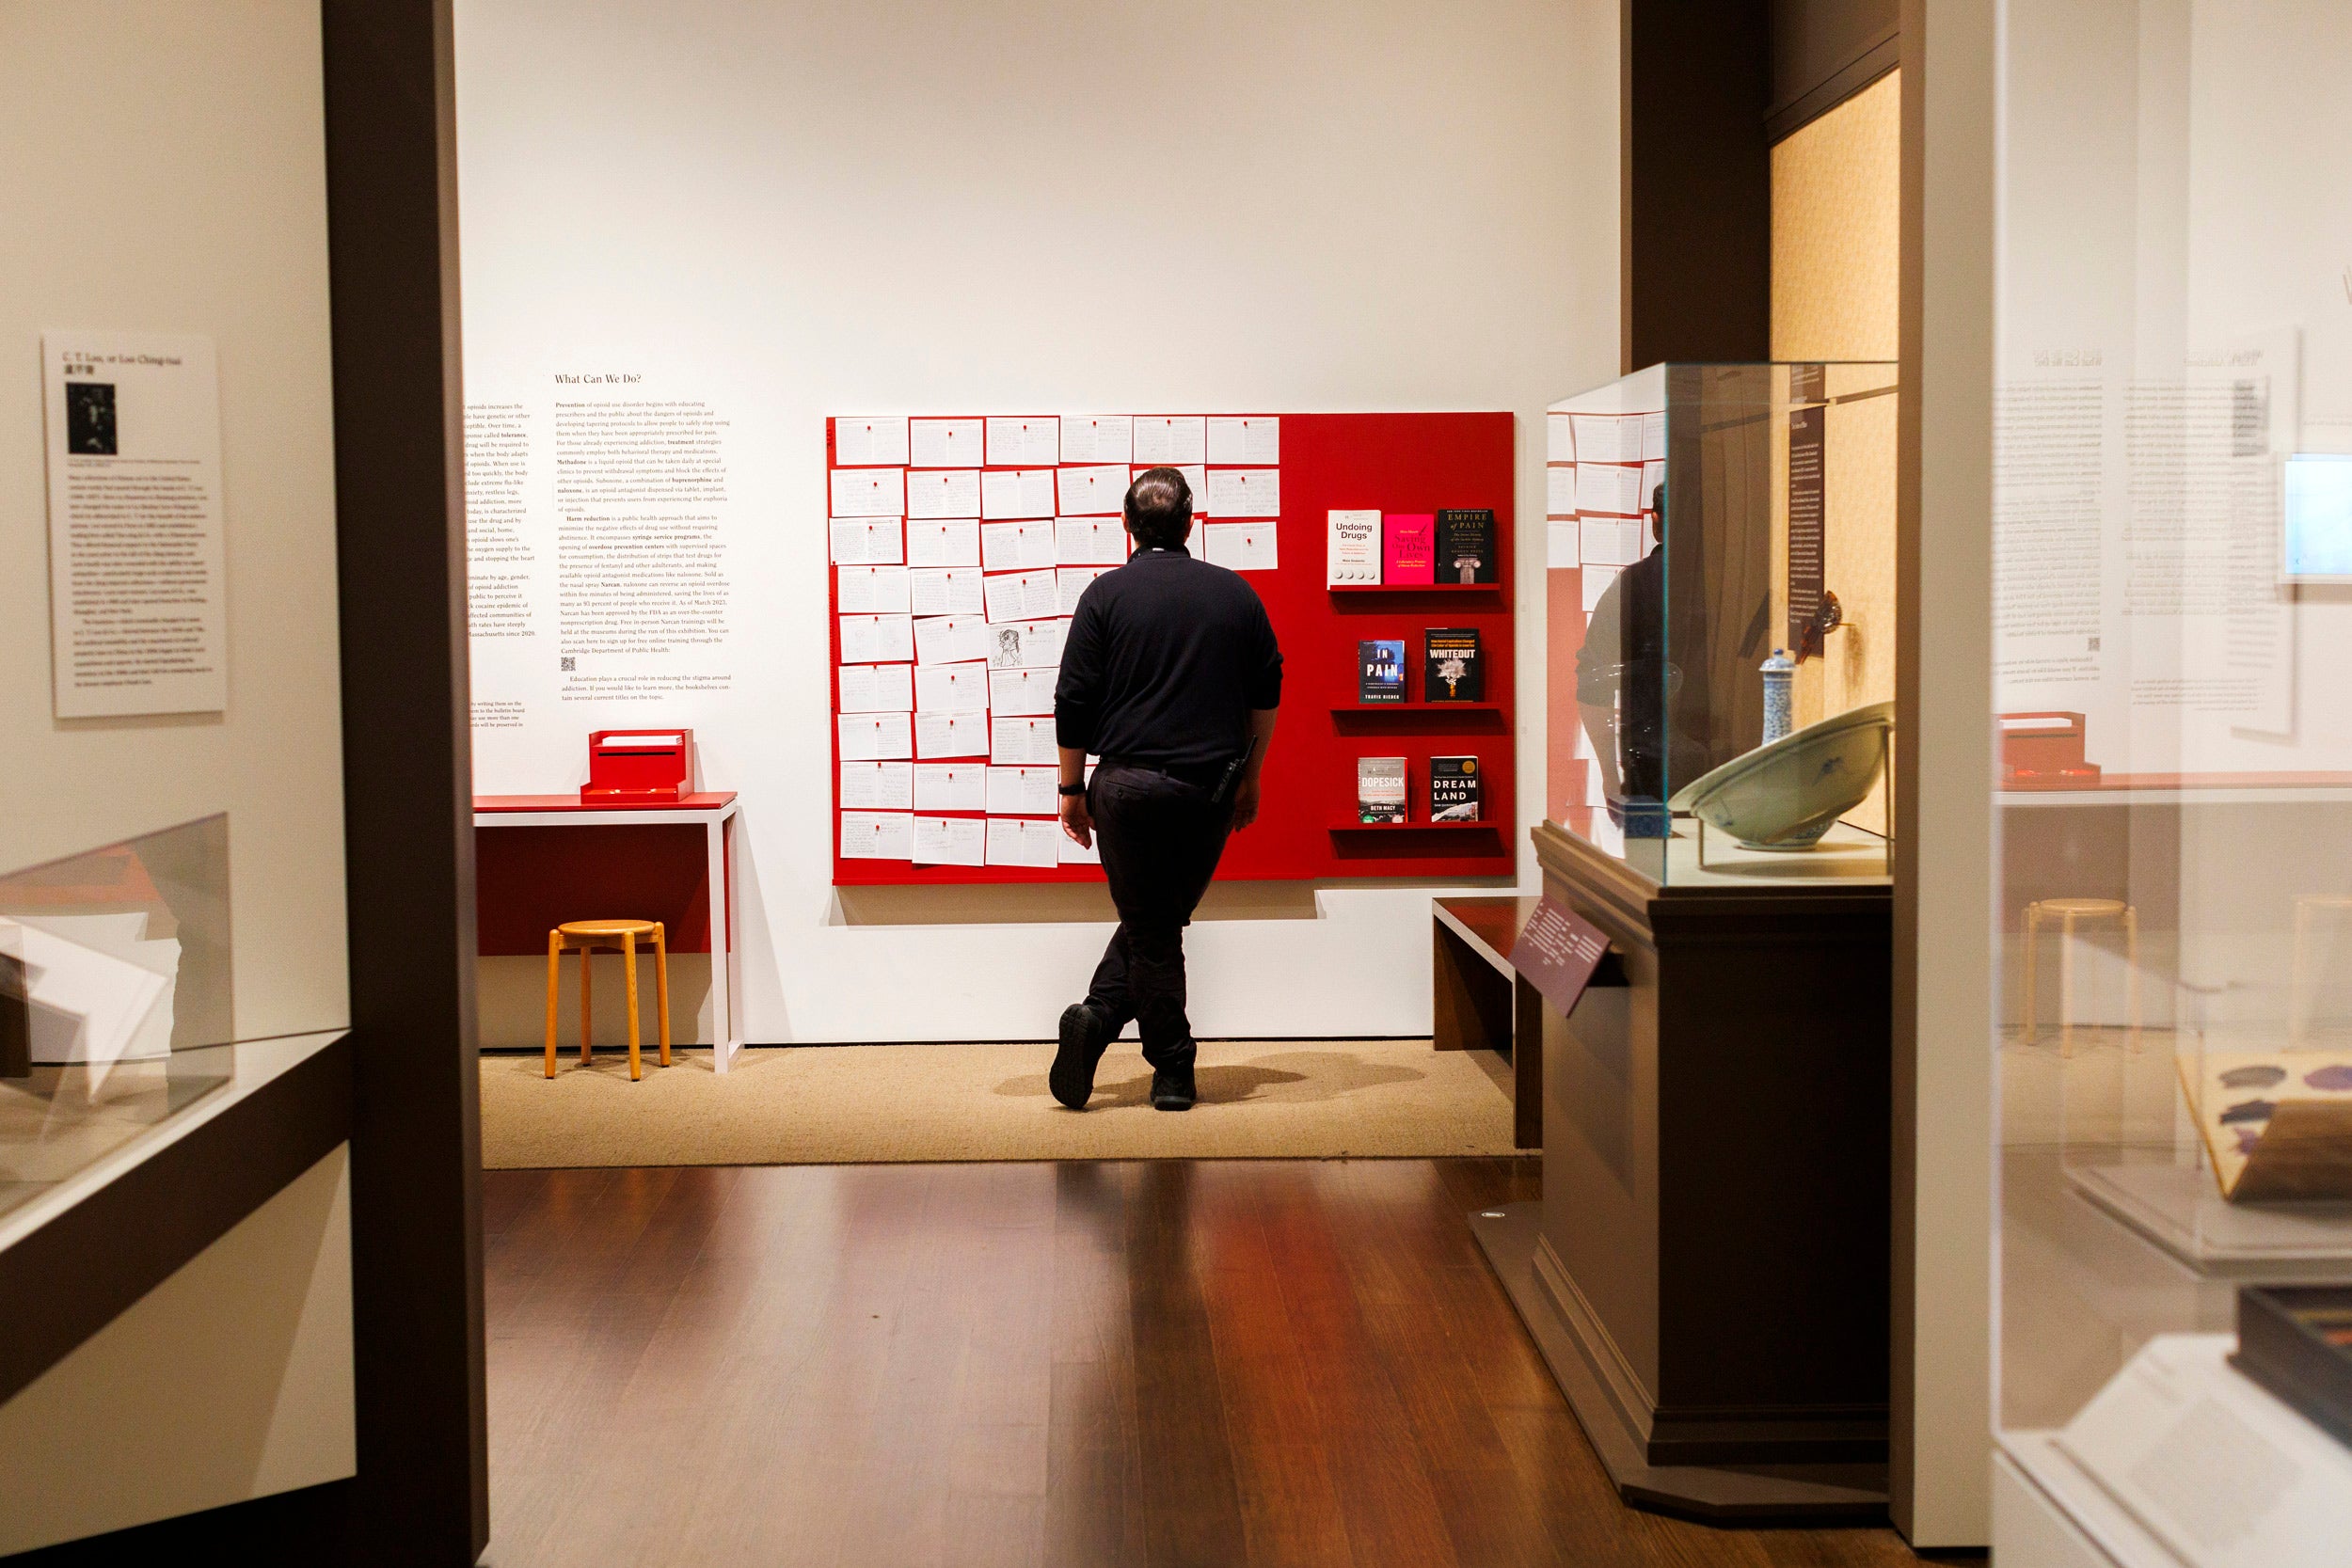 A person is pictured reading the comments written in the exhibition at Harvard Art Museums.